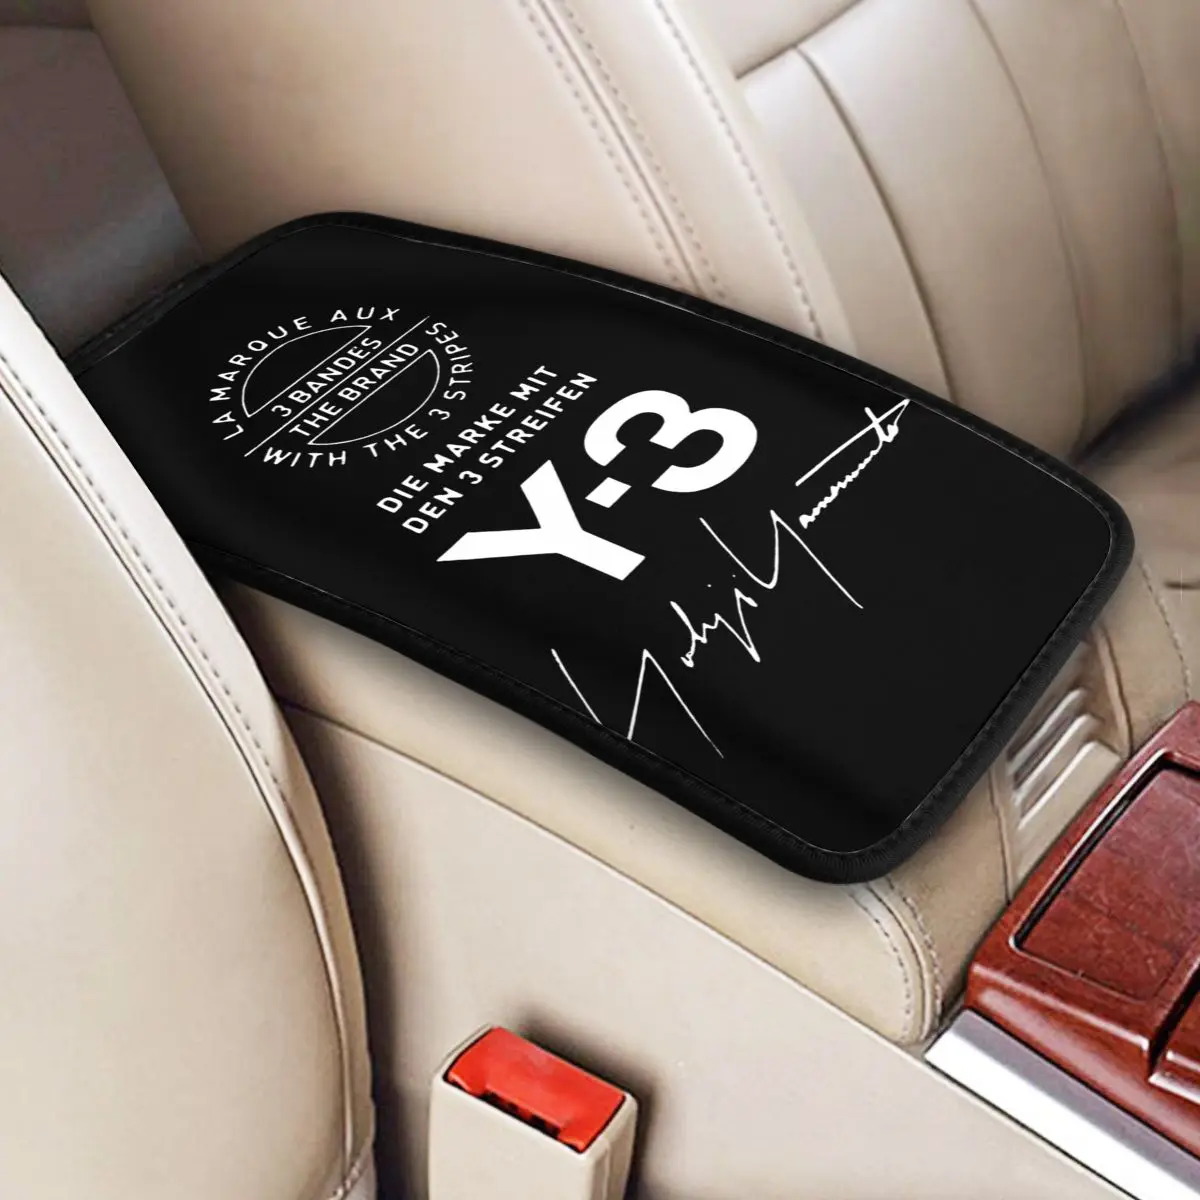 Y-3 Logo Center Cover Pad for Cars Yohji Yamamoto Car Decor Accessories Breathable Armrest Cover Mat - AliExpress Mobile